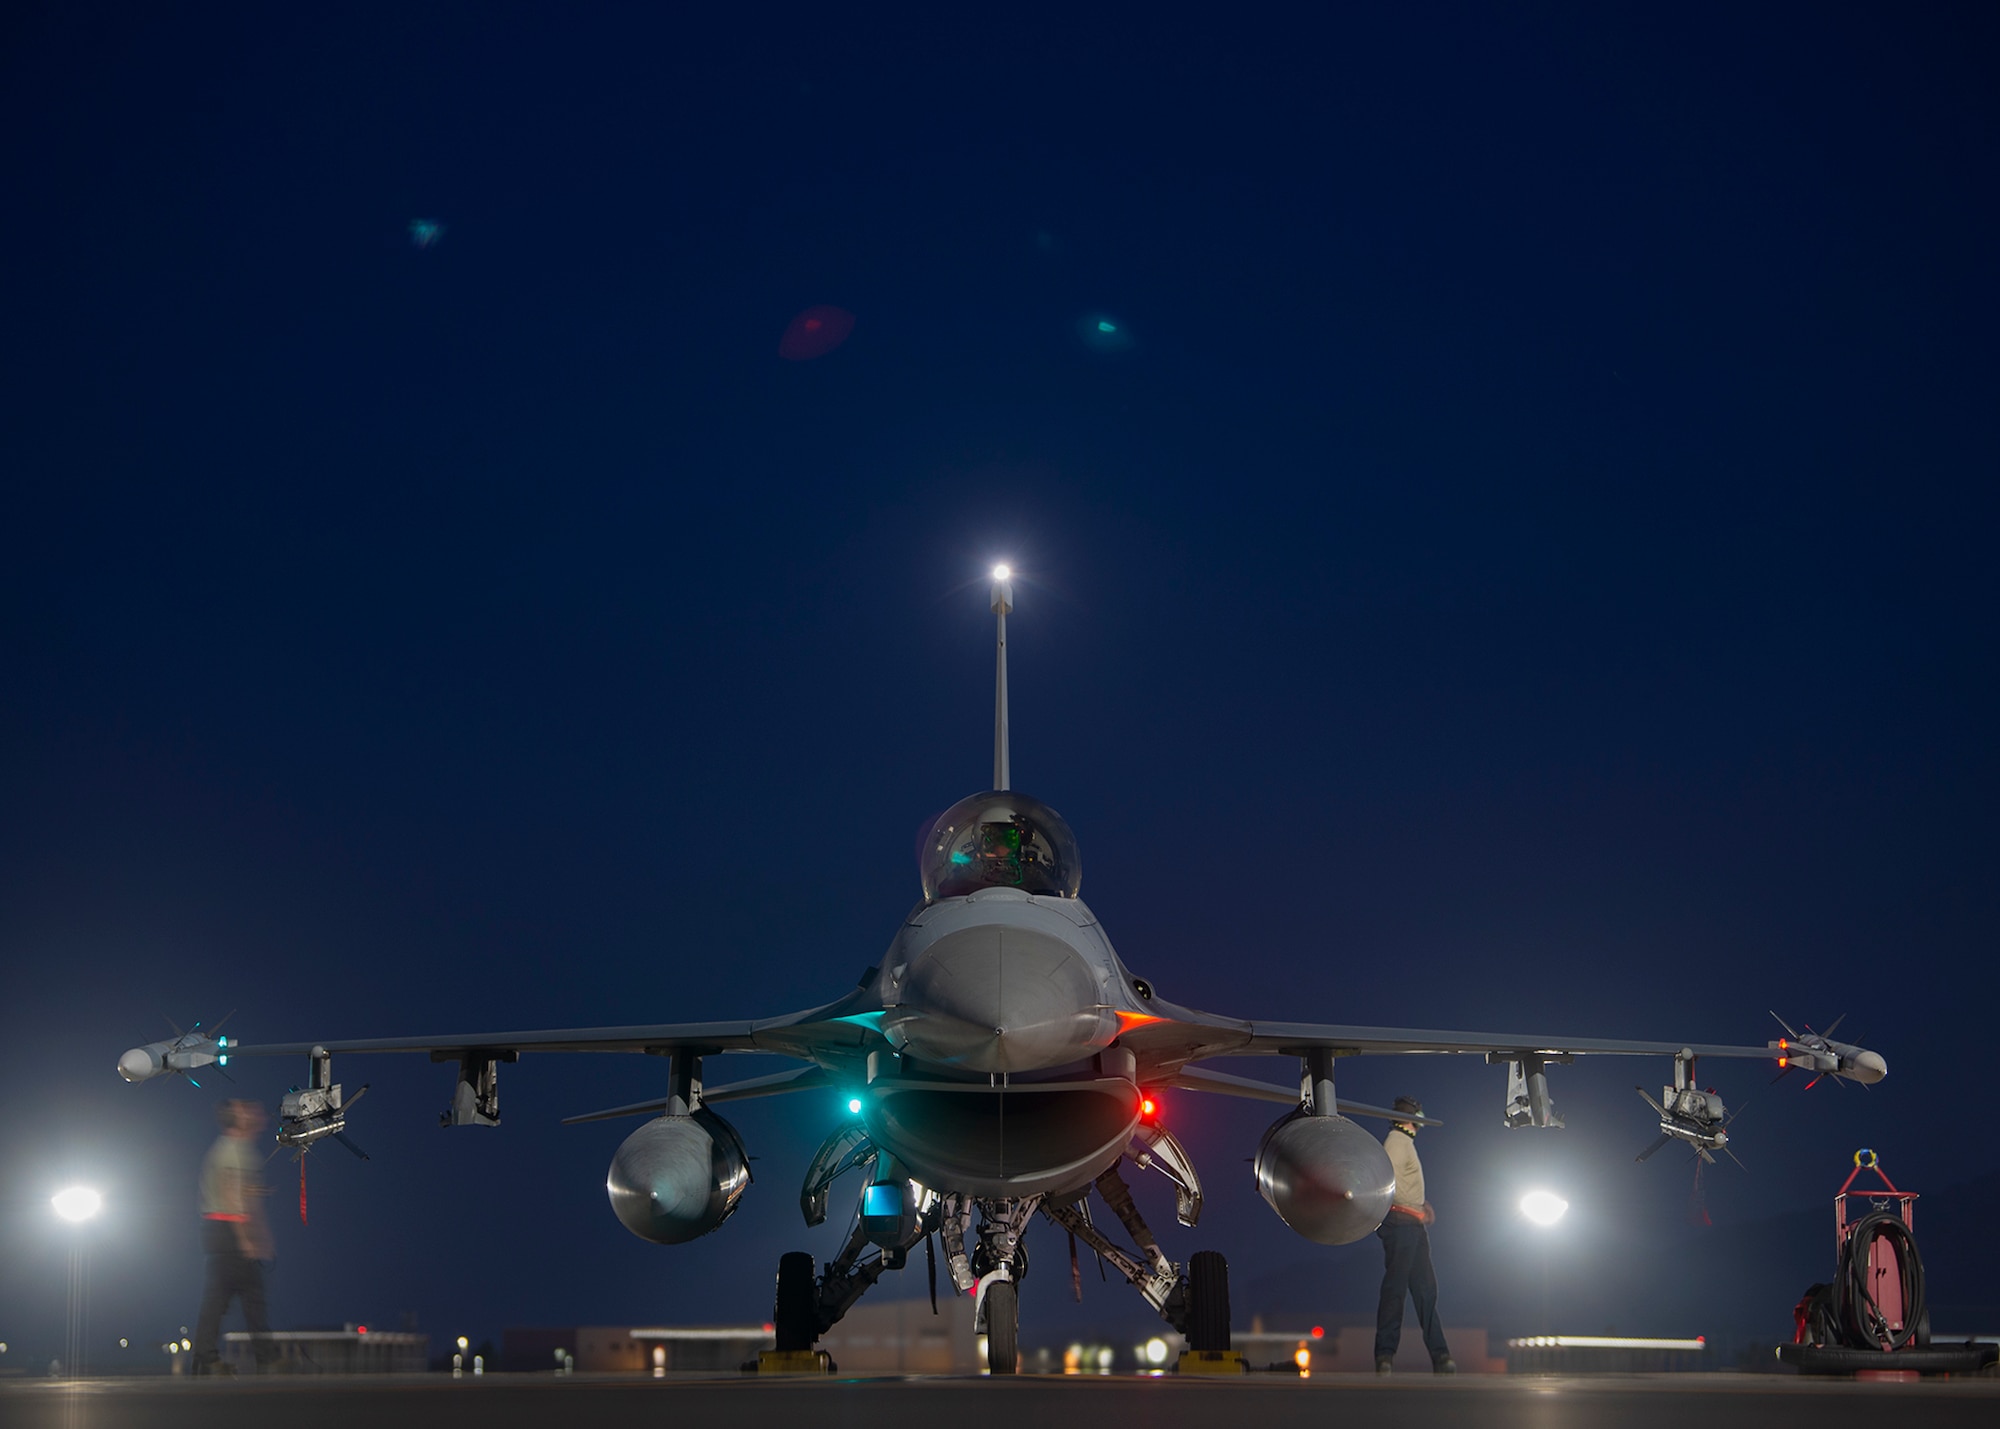 Airmen prepare an aircraft for take-off on the flight line.